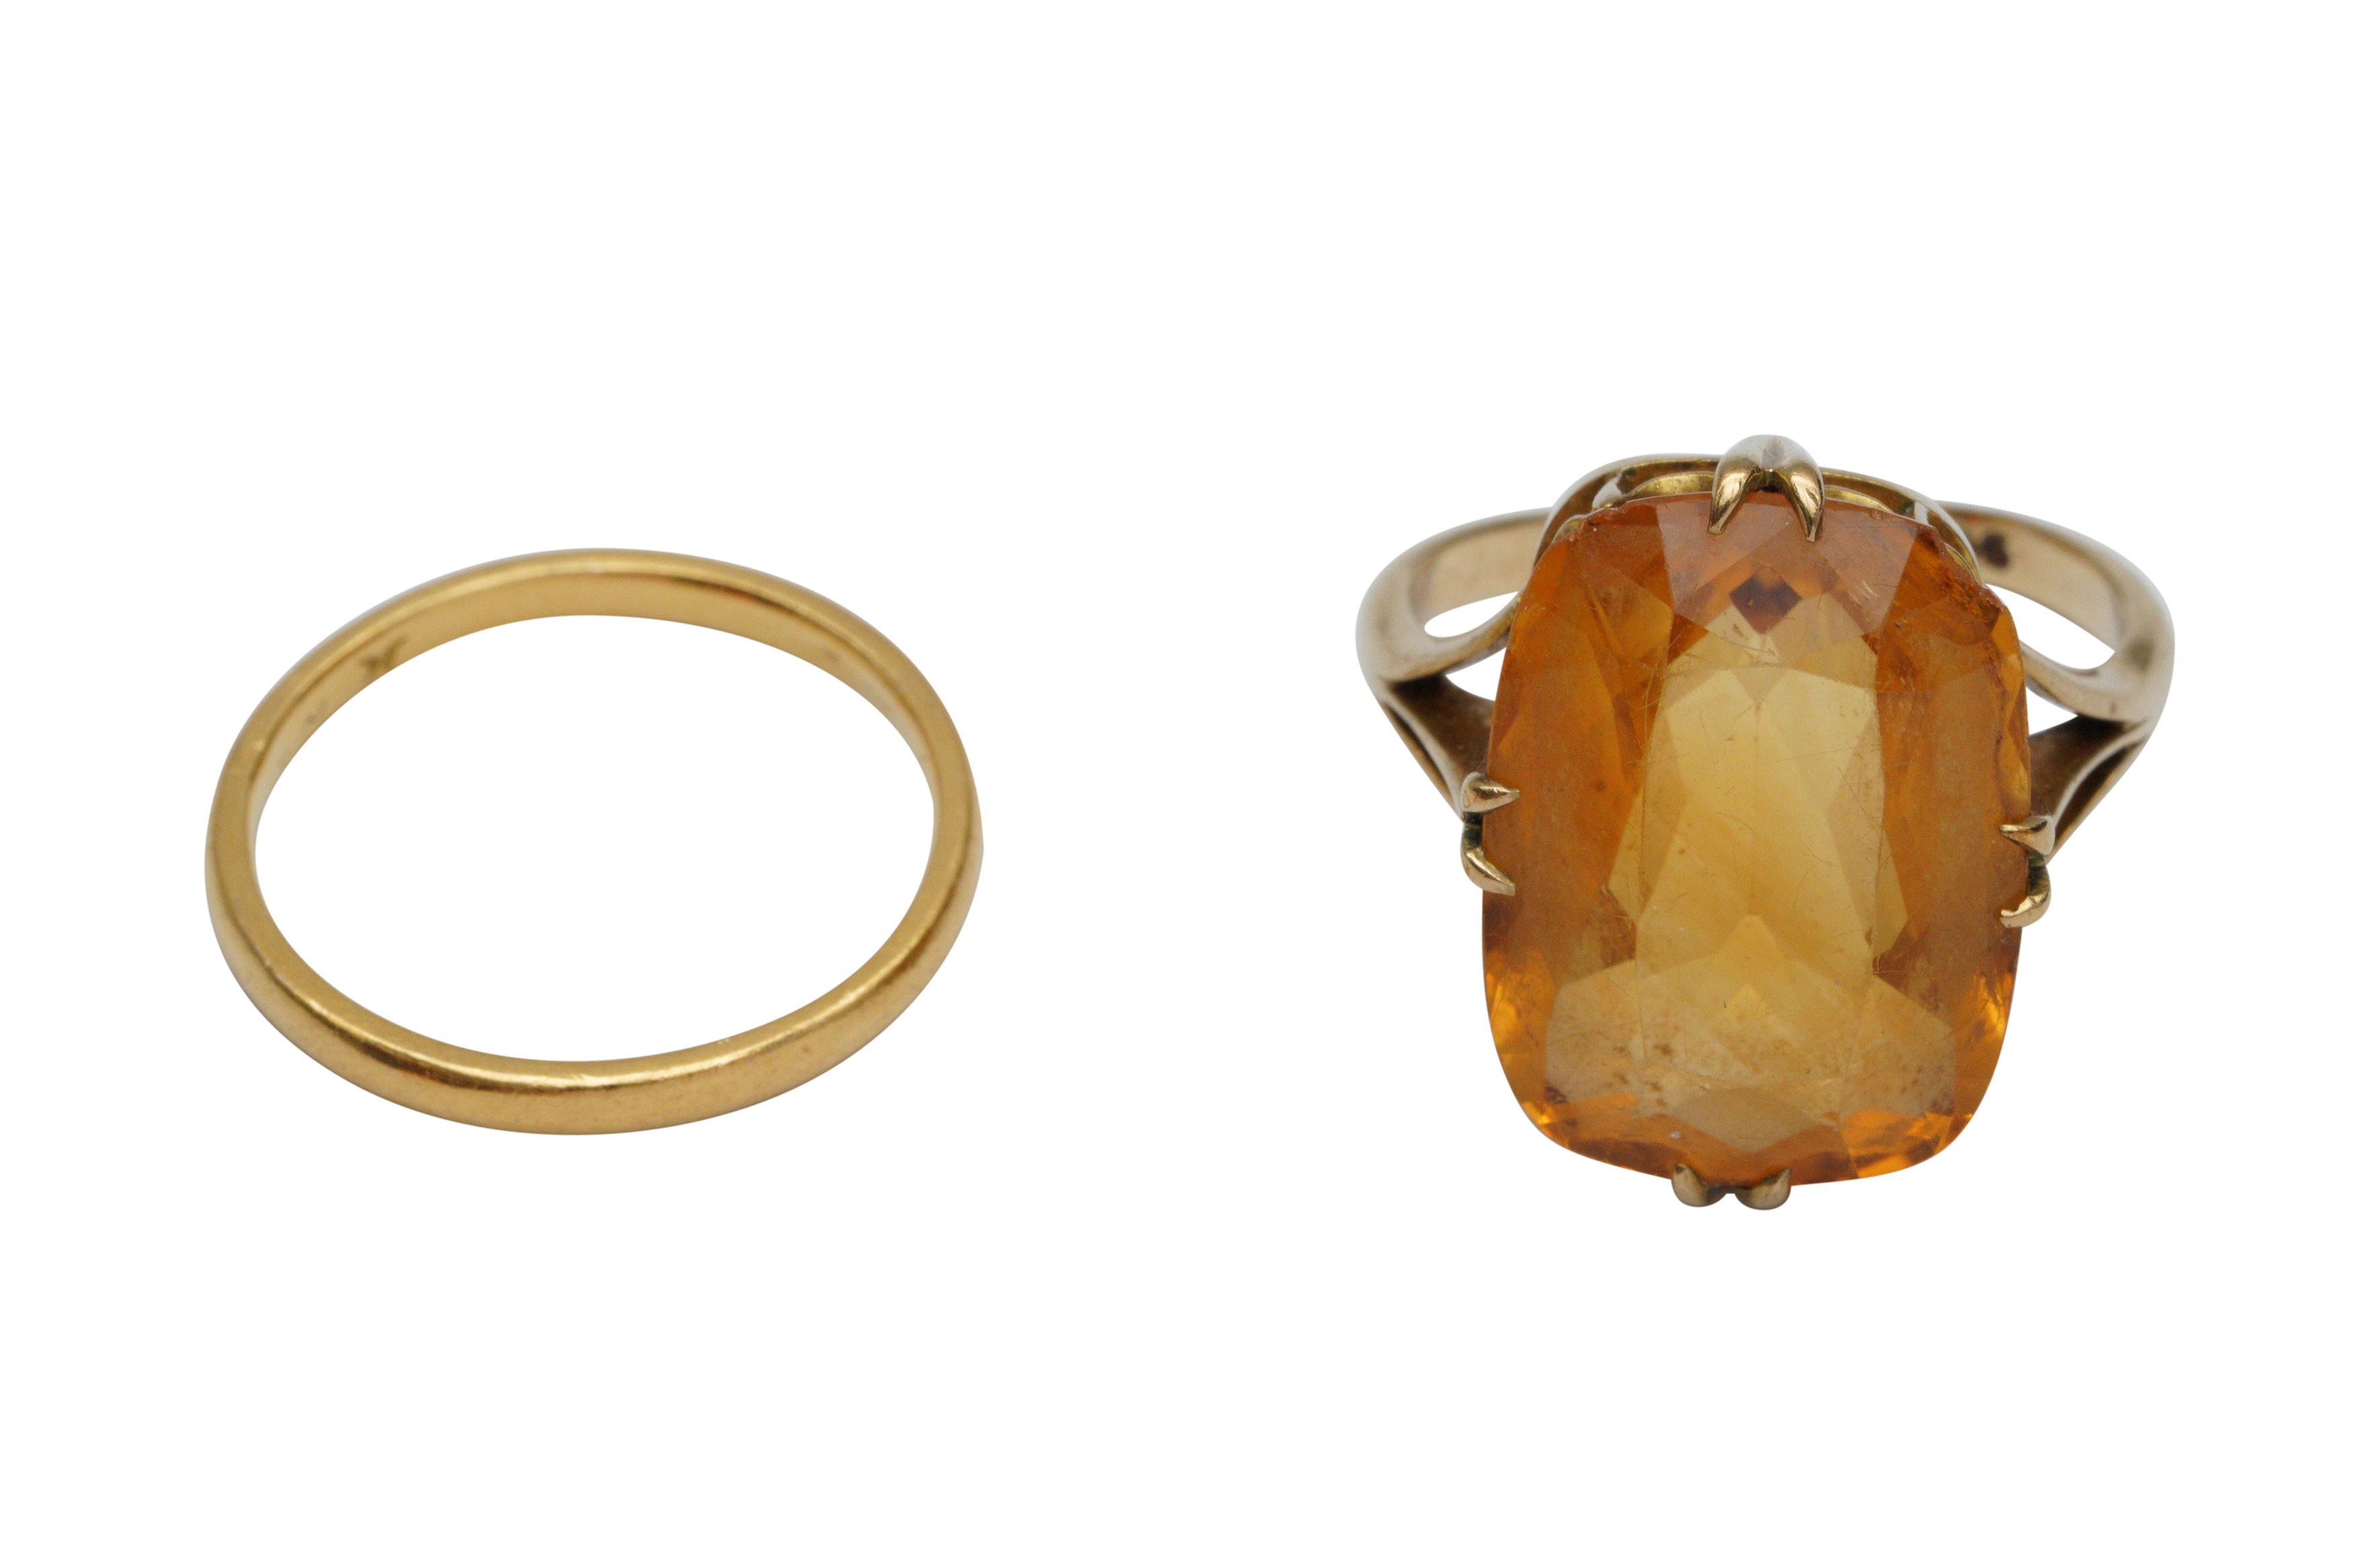 A CITRINE QUARTZ RING TOGETHER WITH A 22CT GOLD BAND